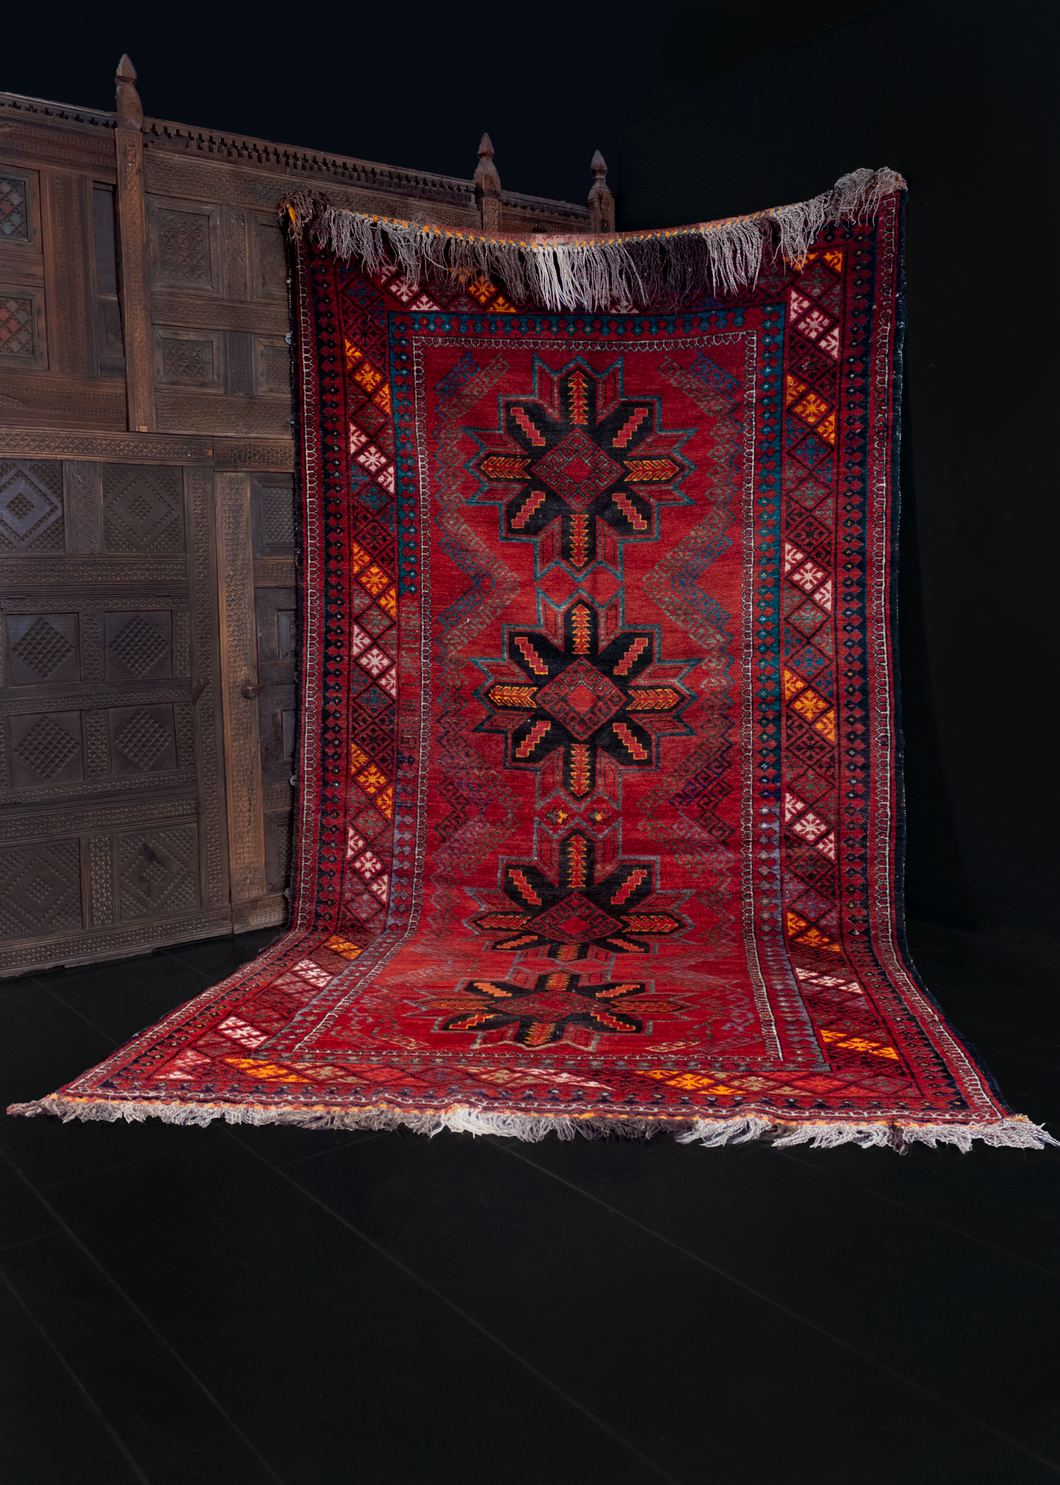 1968 Uzbeki rug with date woven into design of four eight pointed stars on deep red field with latchhooks and diagonal diamond main border. In excellent condition